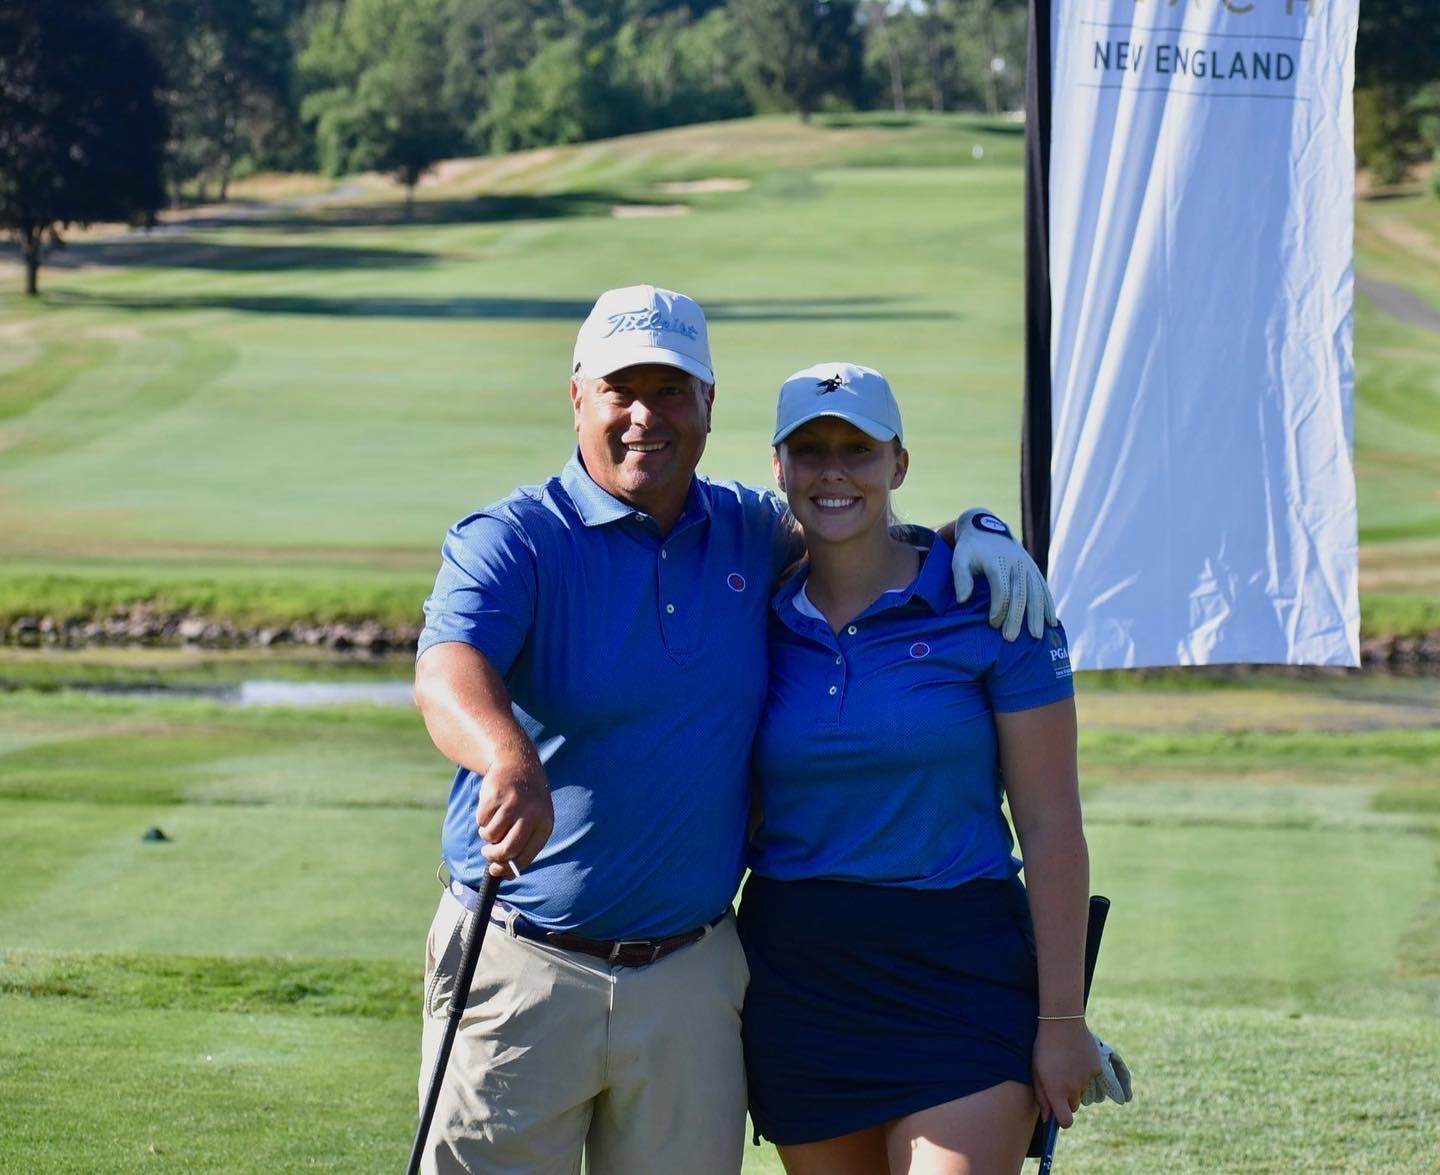 GENERATIONS OF GOLF: OUIMET ALUMNA MADDY BELDEN DISCUSSES FAMILY, GOLF, AND A LIFECHANGING OUIMET SCHOLARSHIP